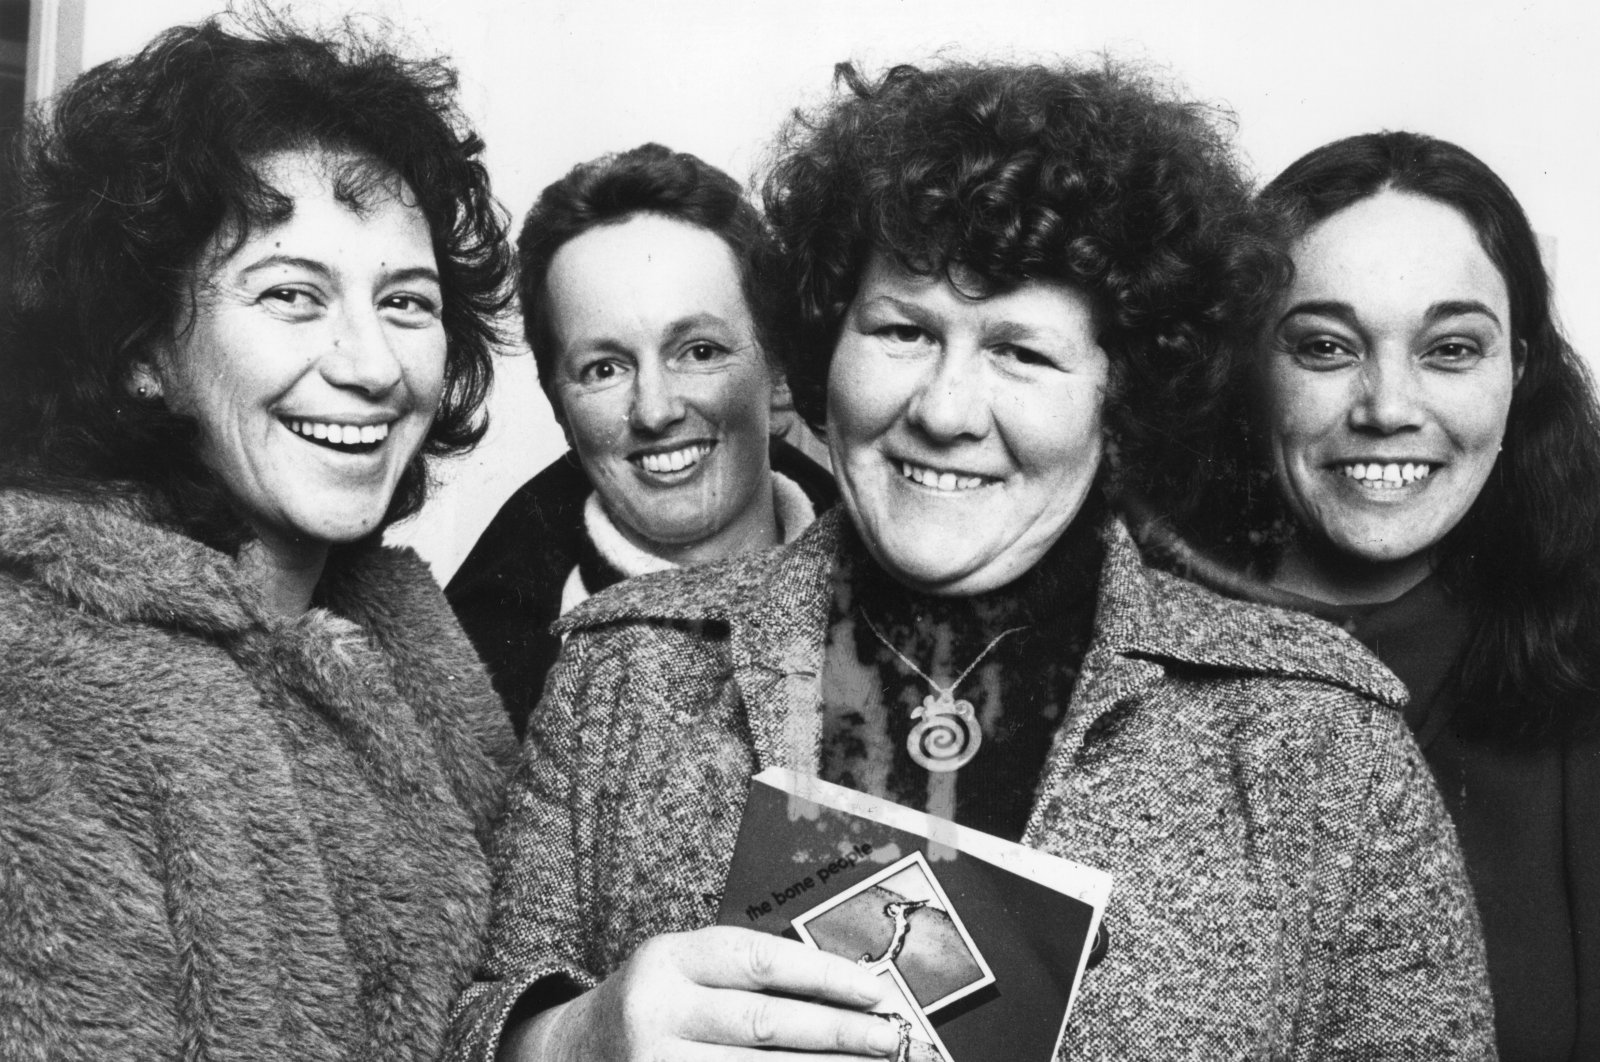 Novelist Keri Hulme (2nd R) poses with Spiral Publishing collective members Miriama Evans (L), Marian Evans and Irihapeti Ramsden (R) in Wellington, New Zealand on July 16, 1984. (AP)